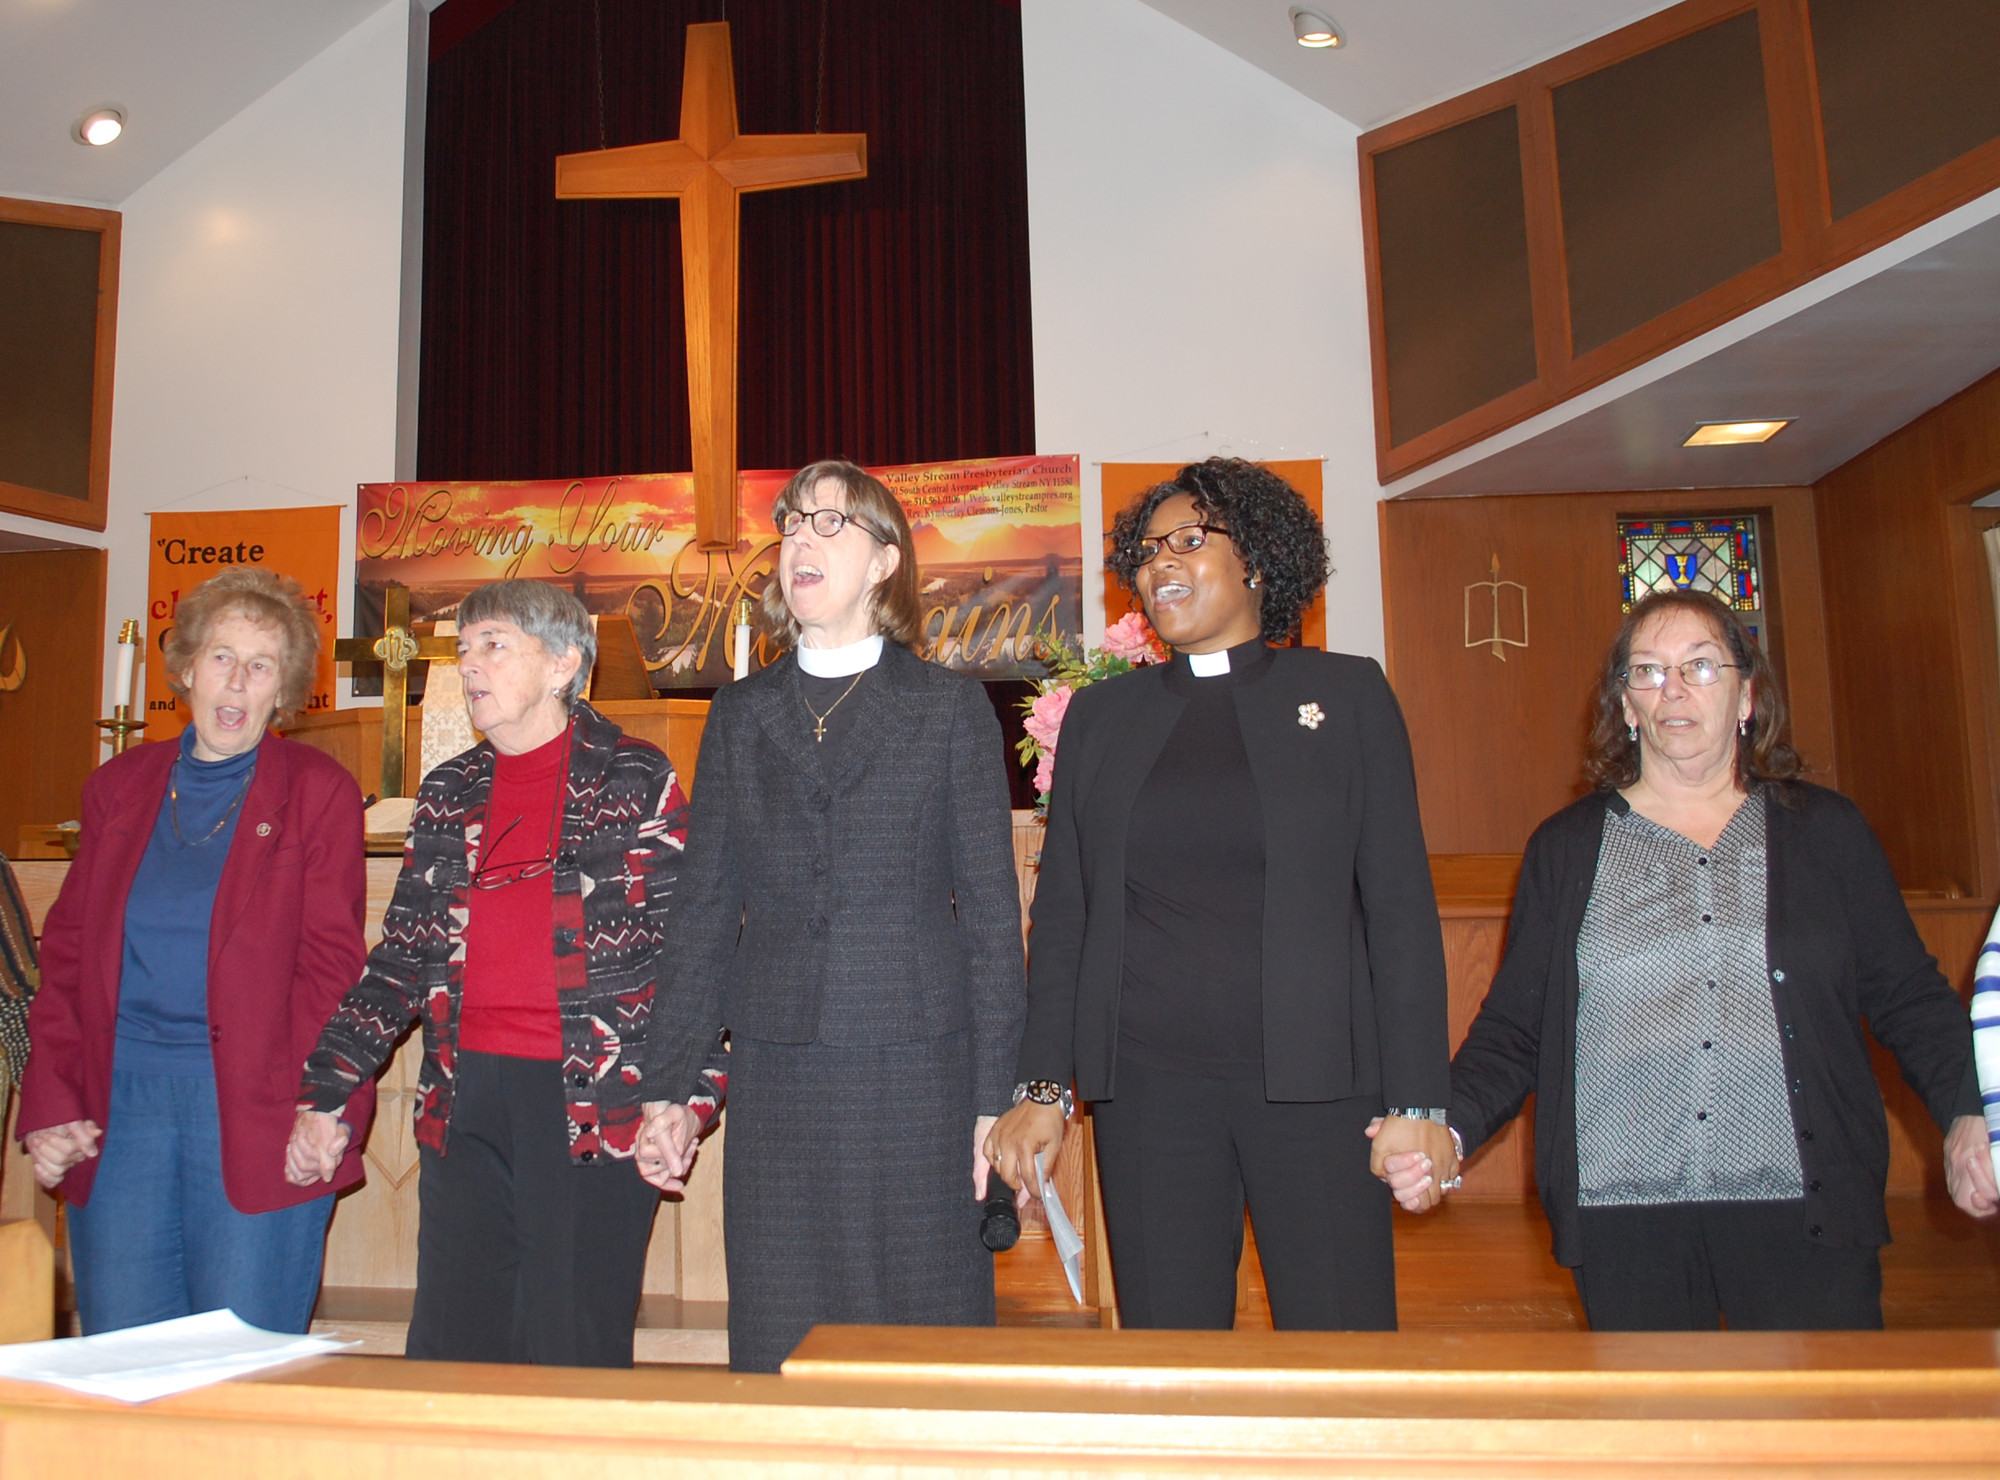 Religious leaders from across the community joined hands to sing “We Shall Overcome” at the annual Dr. Martin Luther King Jr. Day celebration at the Valley Stream Presbyterian Church on Monday. From left were Barbara Myers, Sister Margie Kelly, the Rev. Katherine Brooks, the Rev. Kymberley Clemons-Jones and Marie McNair.